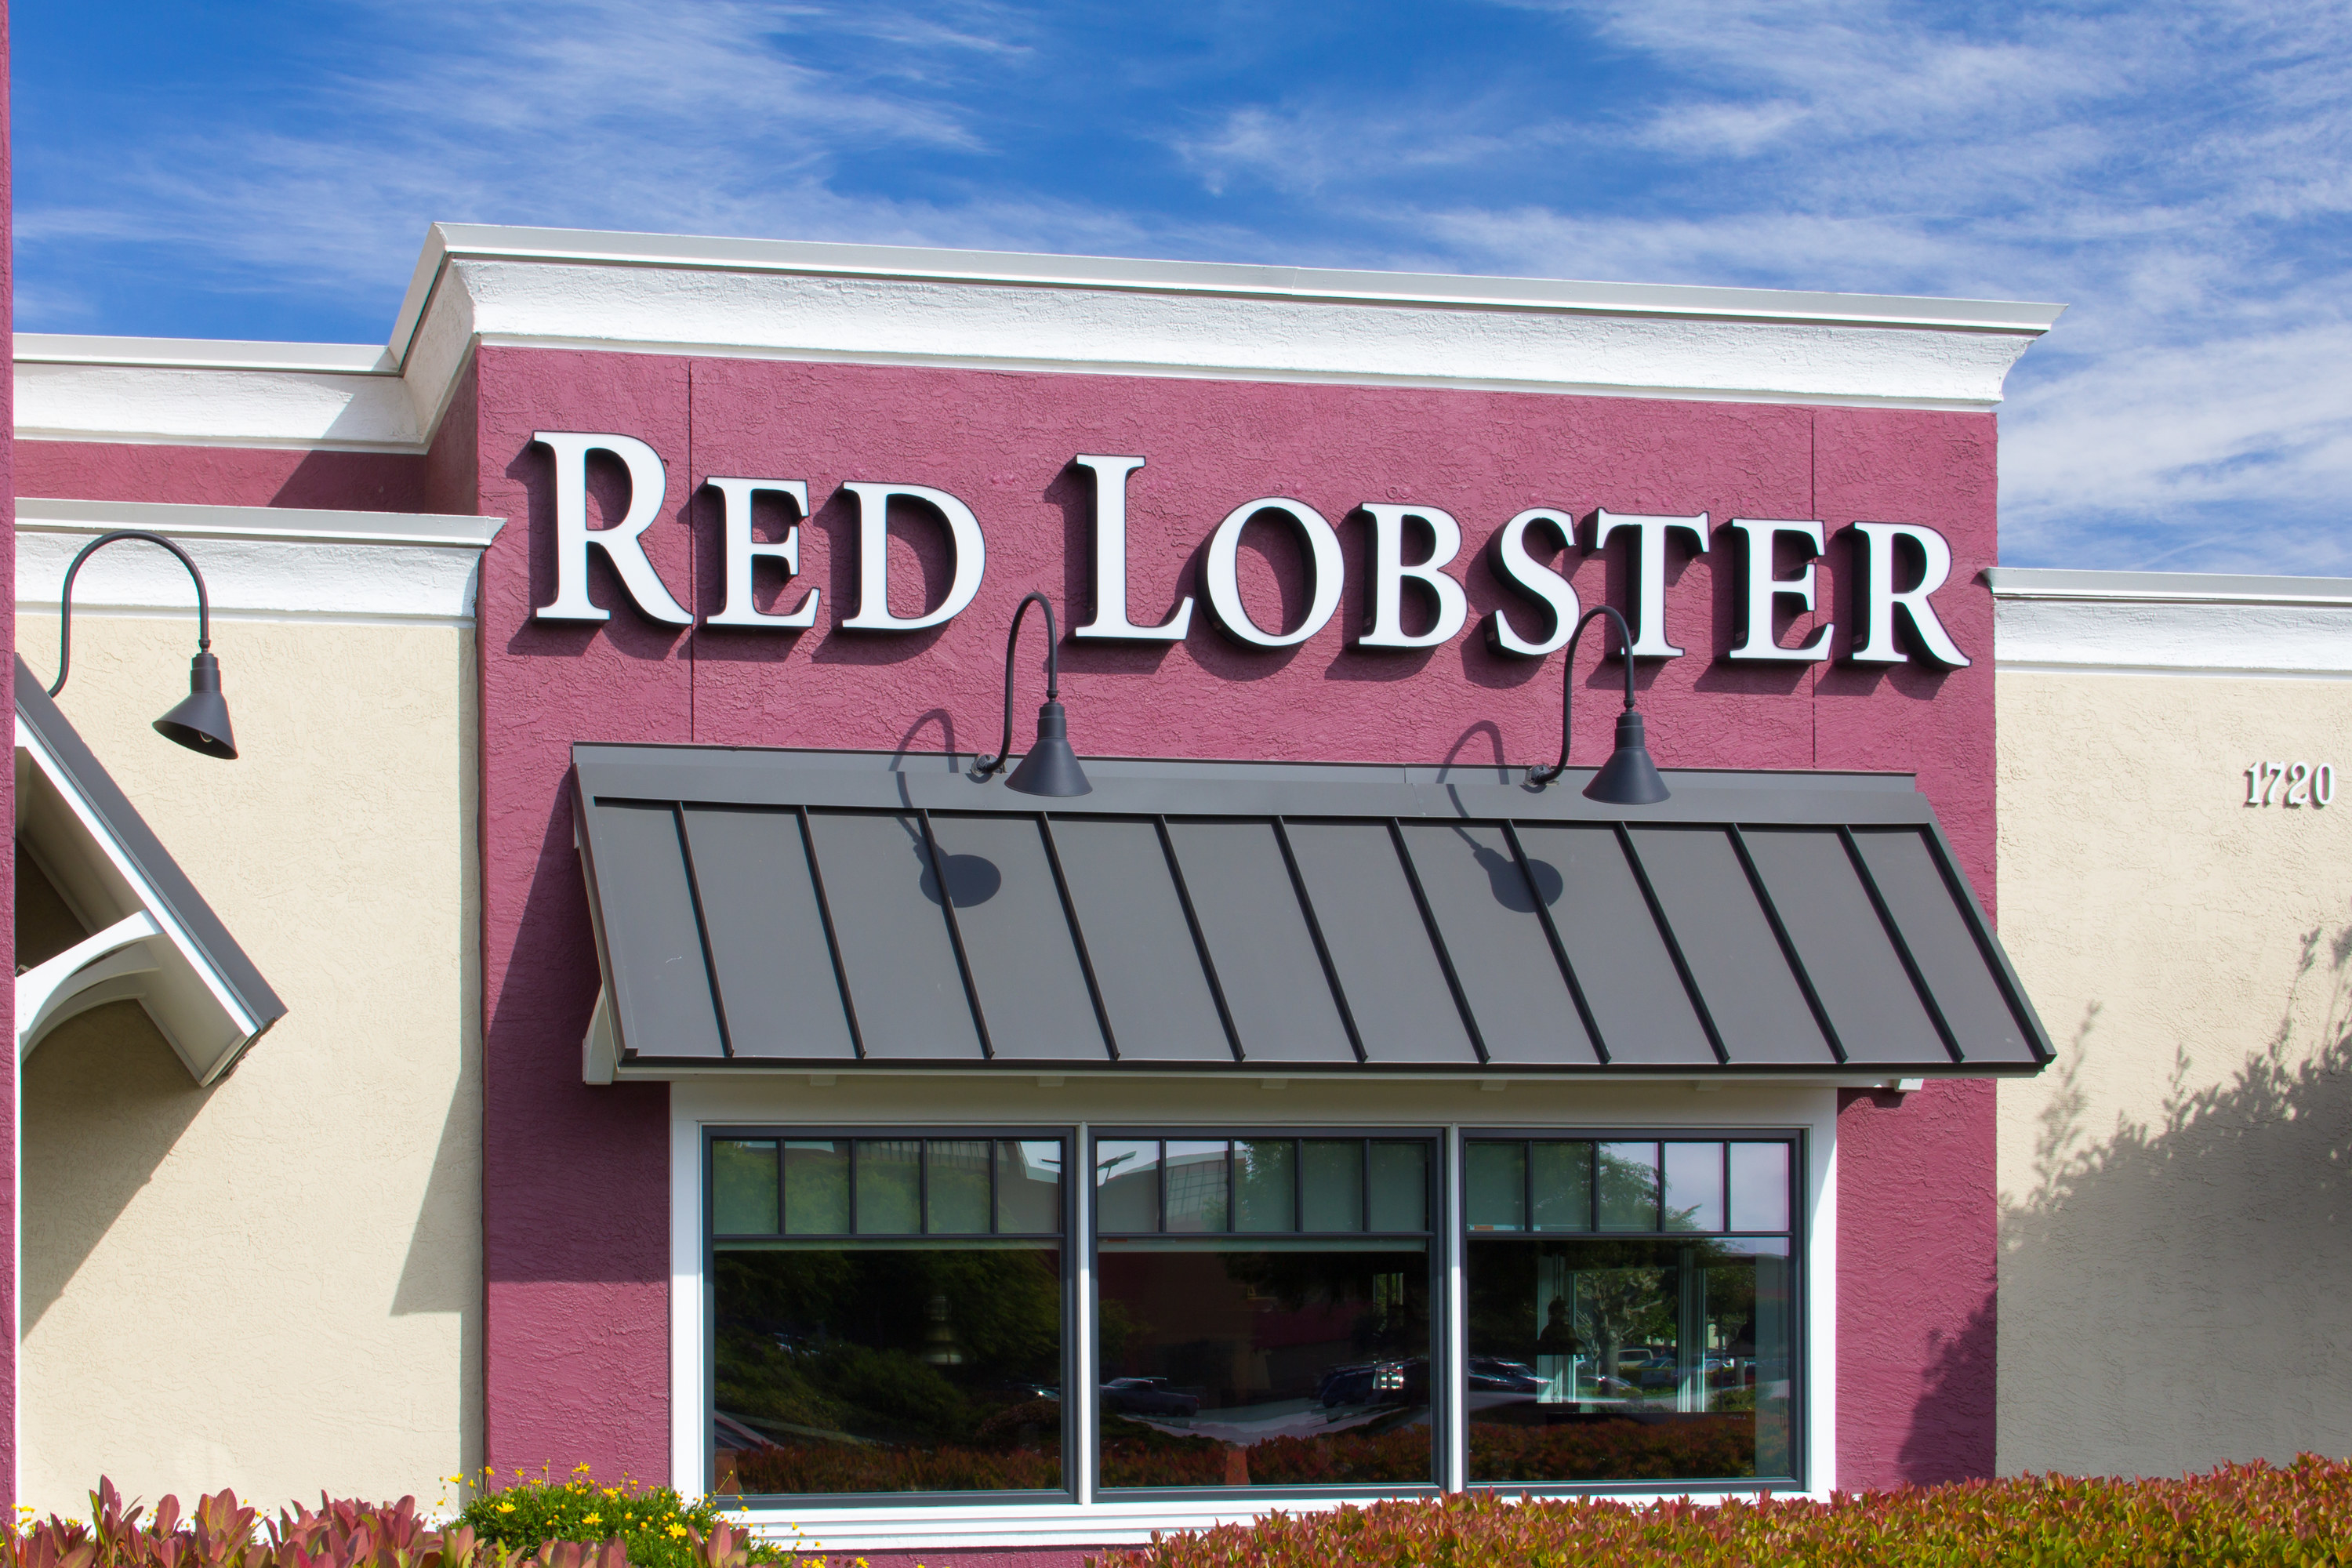 A Red Lobster restaurant